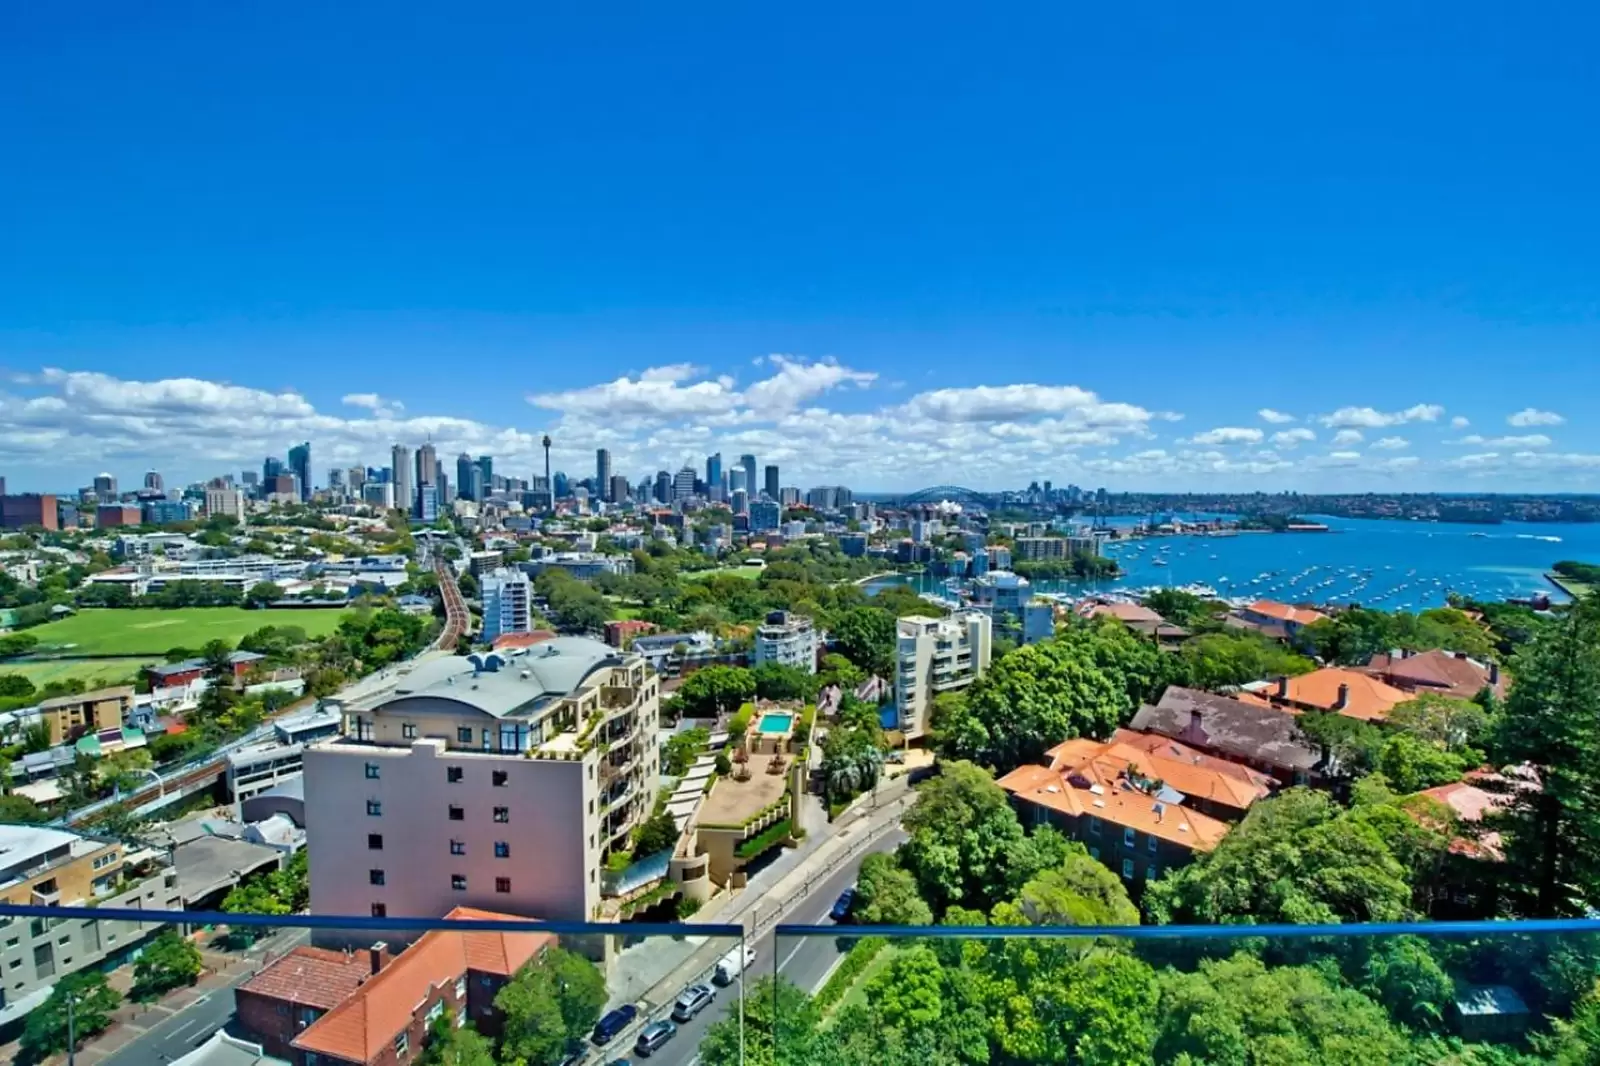 Photo #12: 13A/3 Darling Point Road, Darling Point - Leased by Sydney Sotheby's International Realty